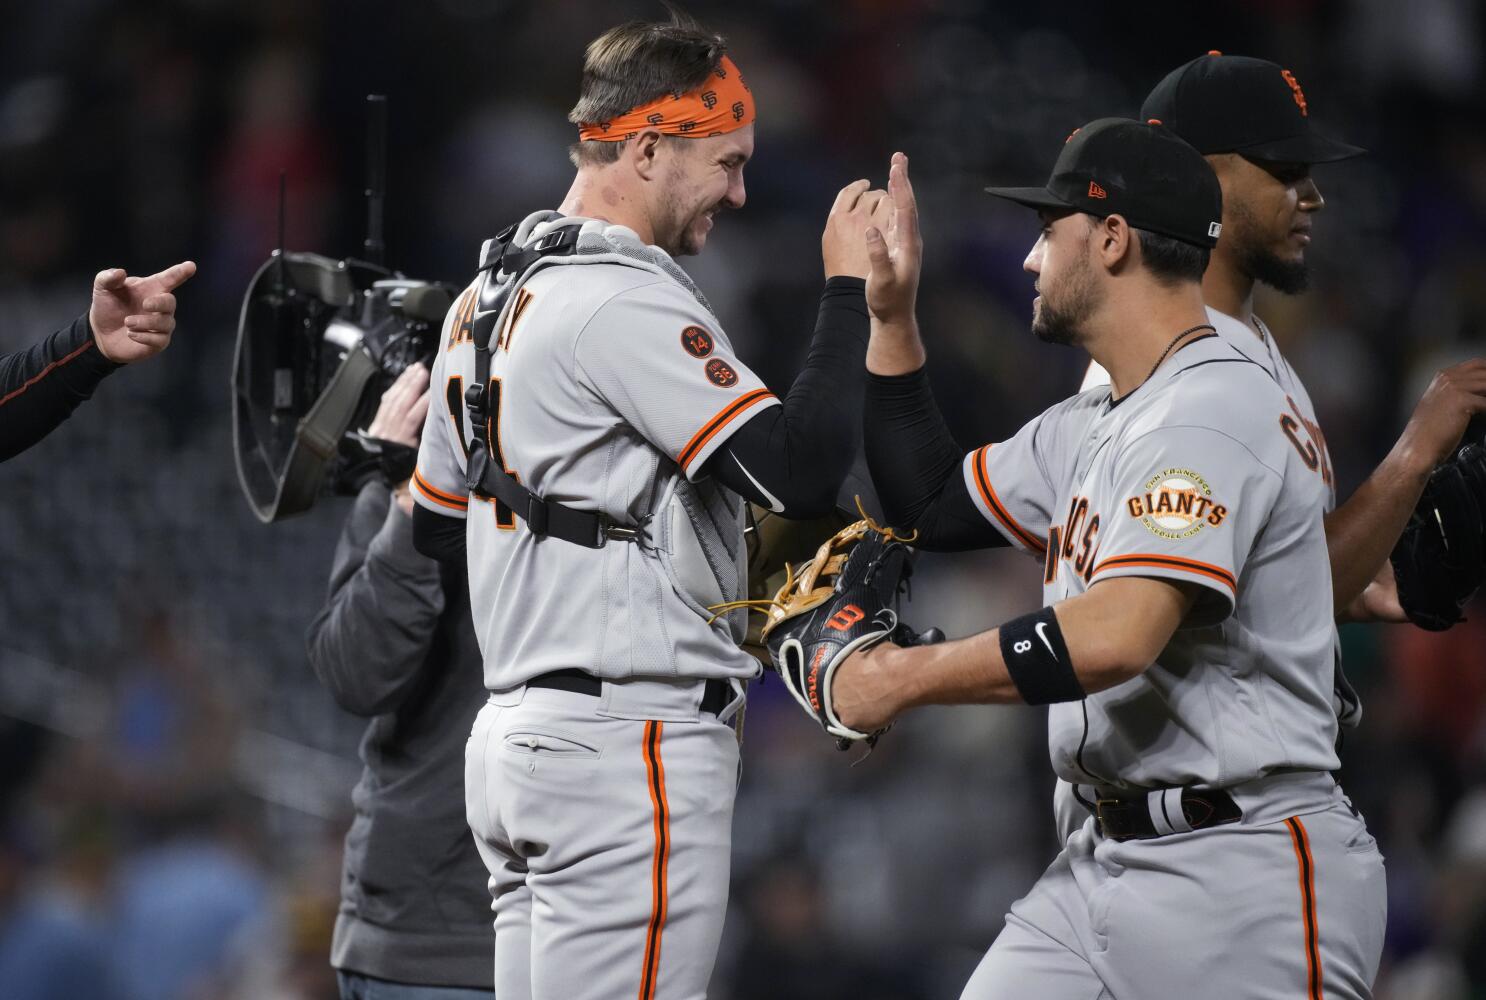 Rockies blow two big leads, lose to Giants in San Francisco